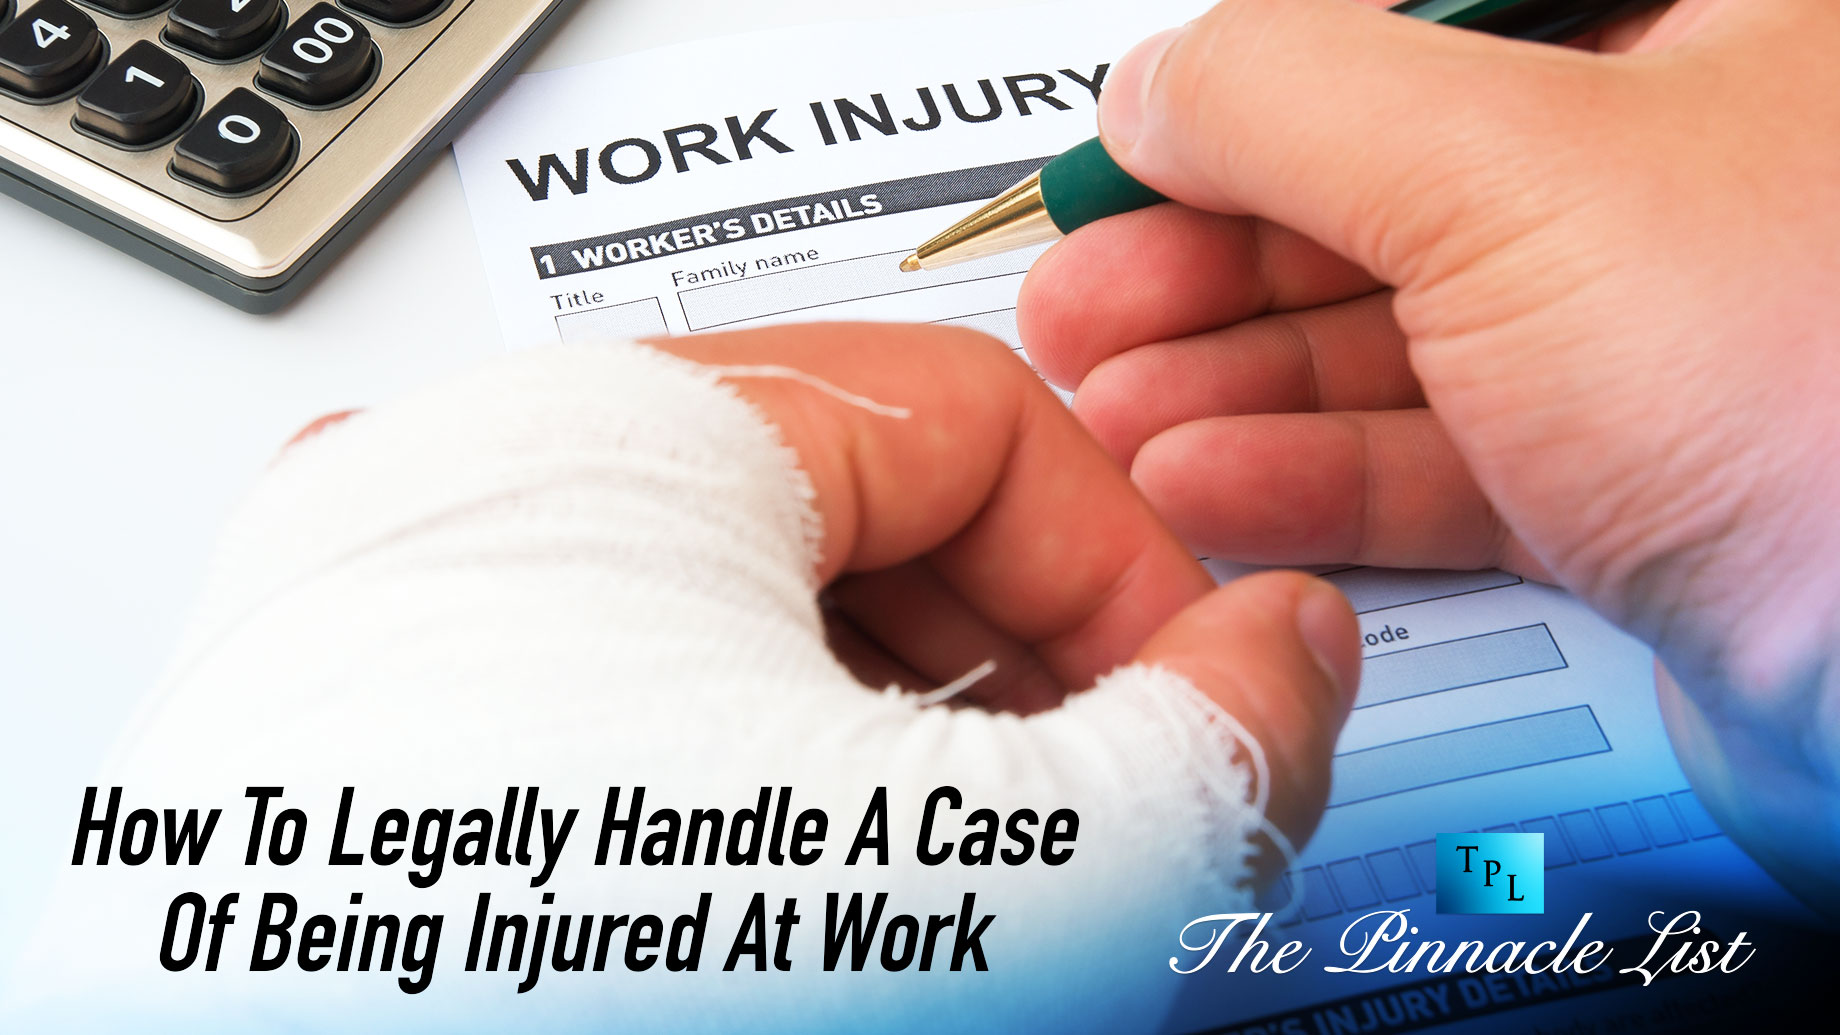 How To Legally Handle A Case Of Being Injured At Work